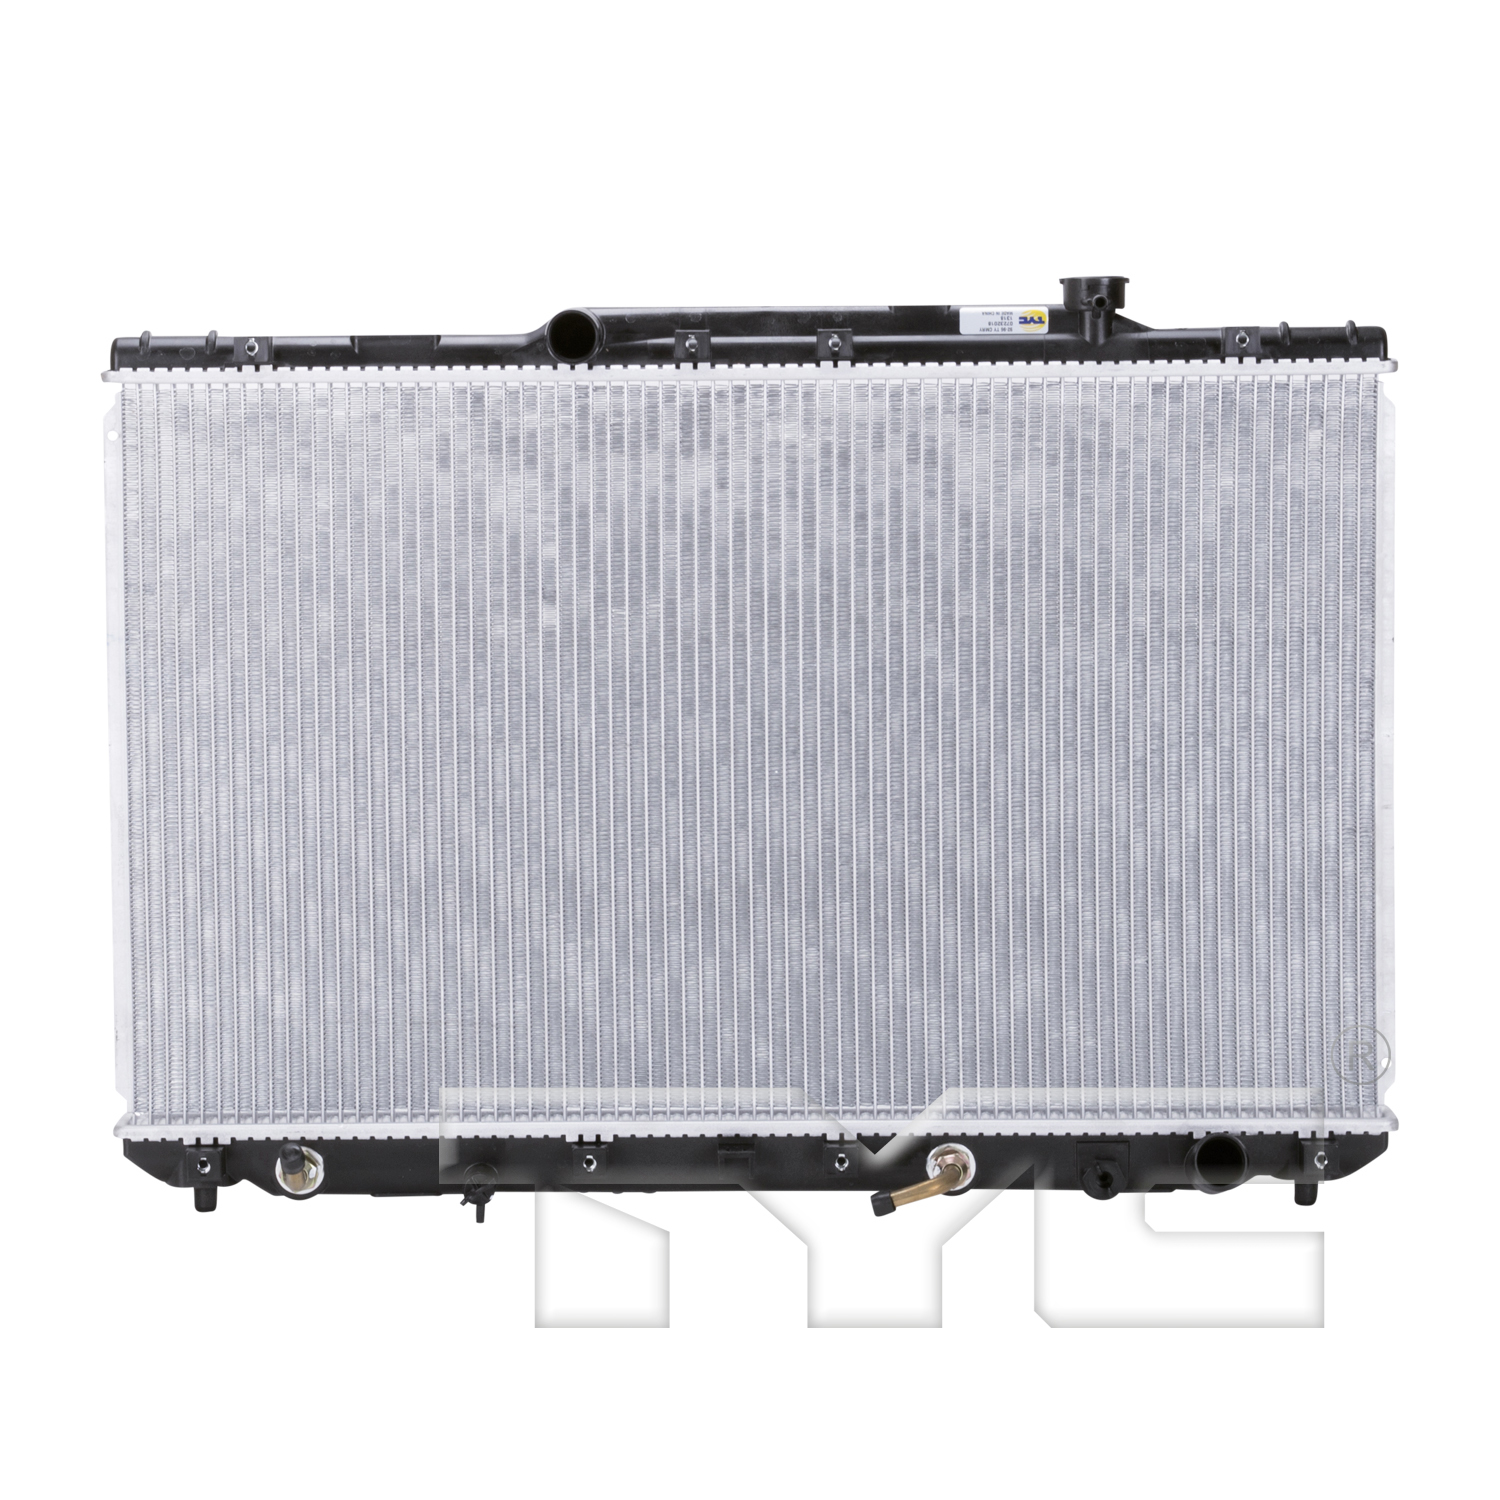 Aftermarket RADIATORS for TOYOTA - CAMRY, CAMRY,92-96,Radiator assembly